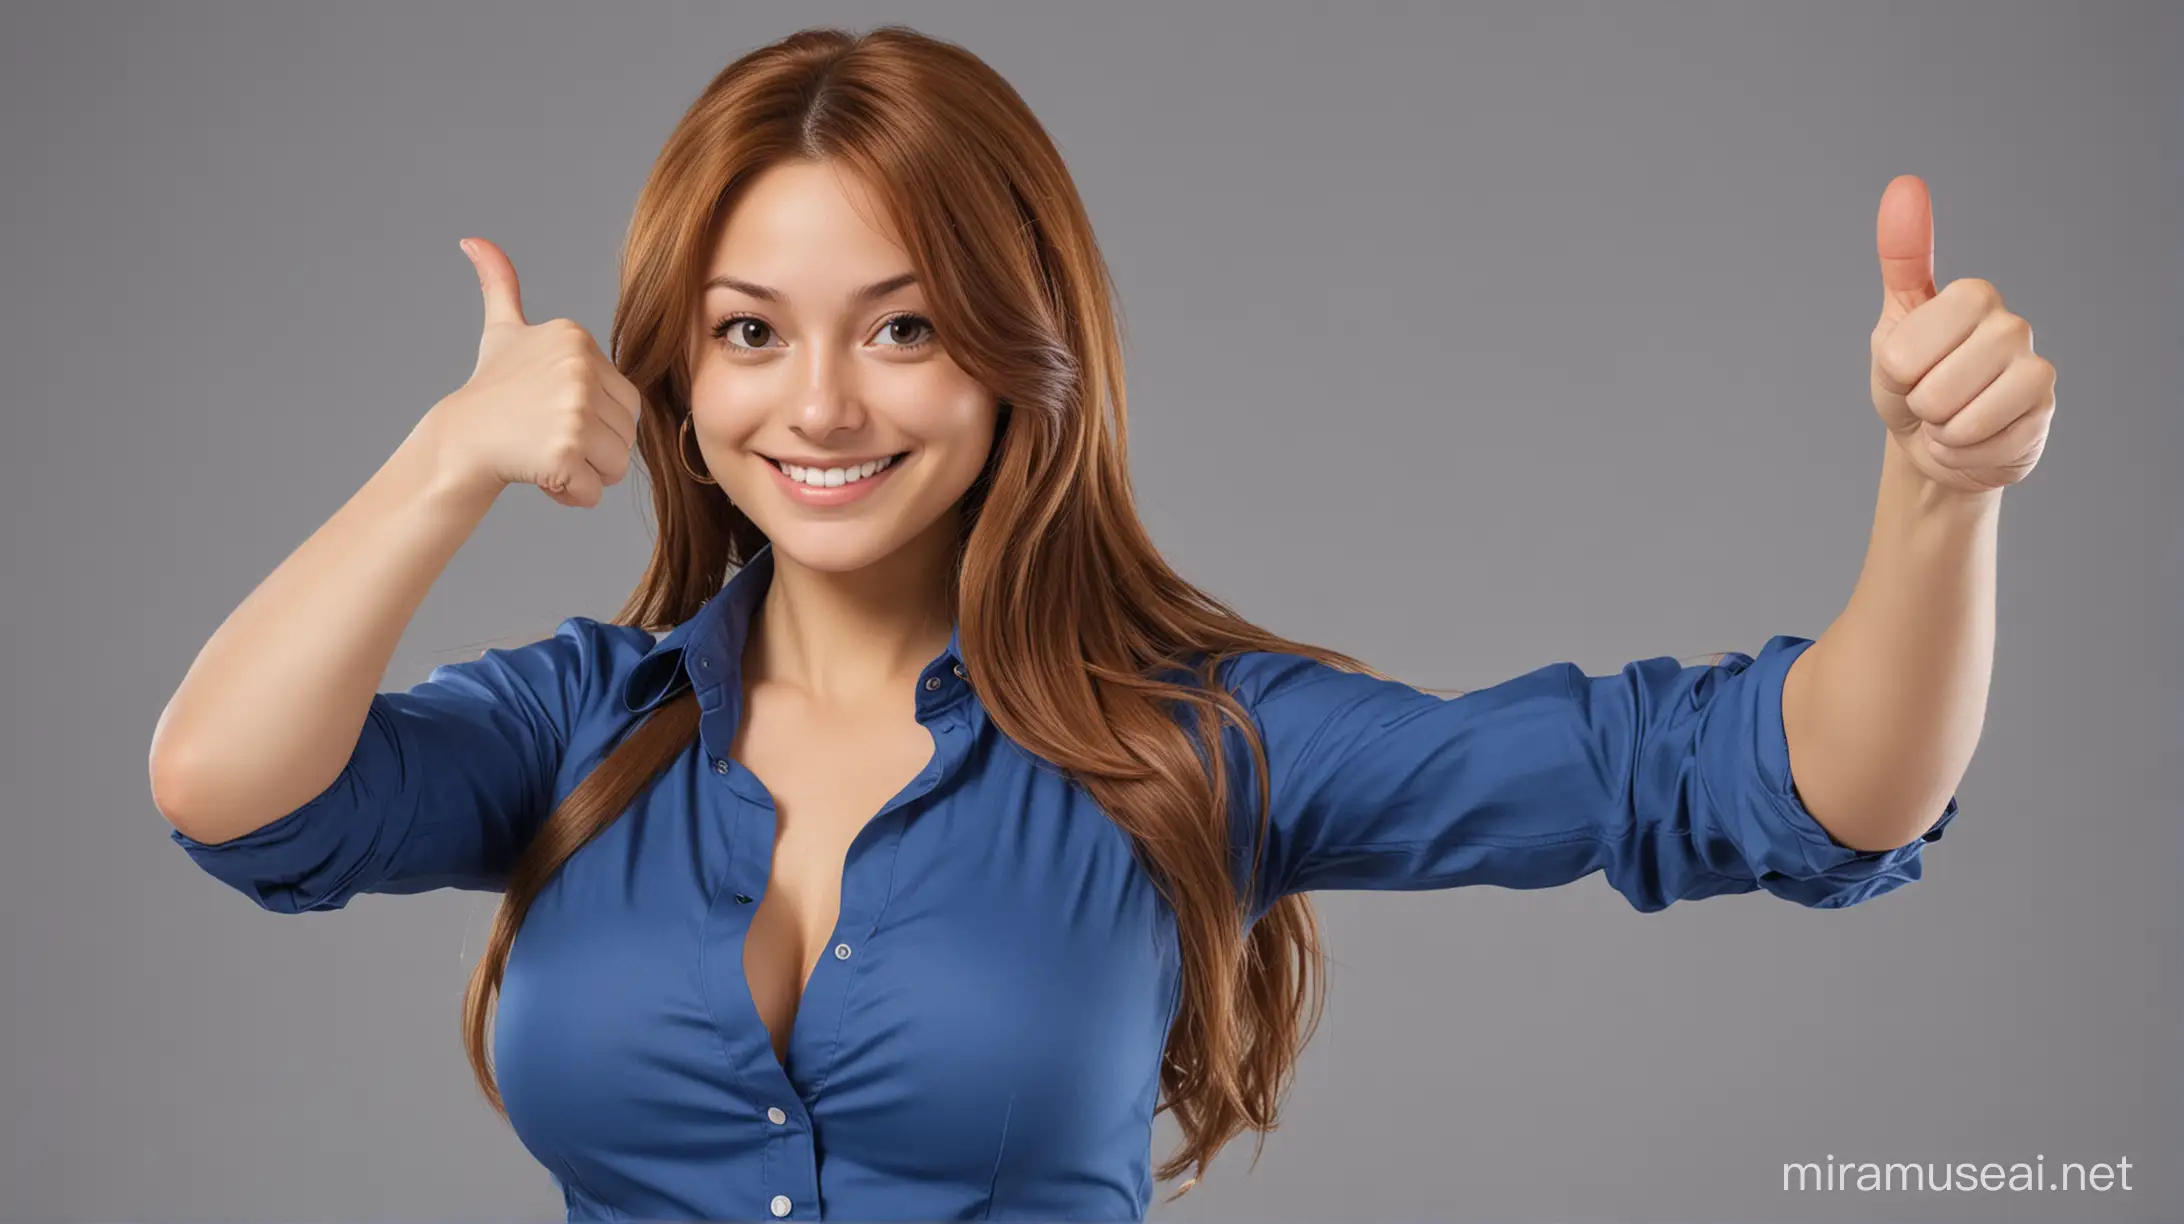 Young beautiful girl, similar to Nami from One Piece. She has long brown hair and huge natural bust. She is wearing blue shirt with cleavage. She smiles to the camera and keeps her right hand in a "thumbs-up" gesture next to her head (at the level of her right ear).